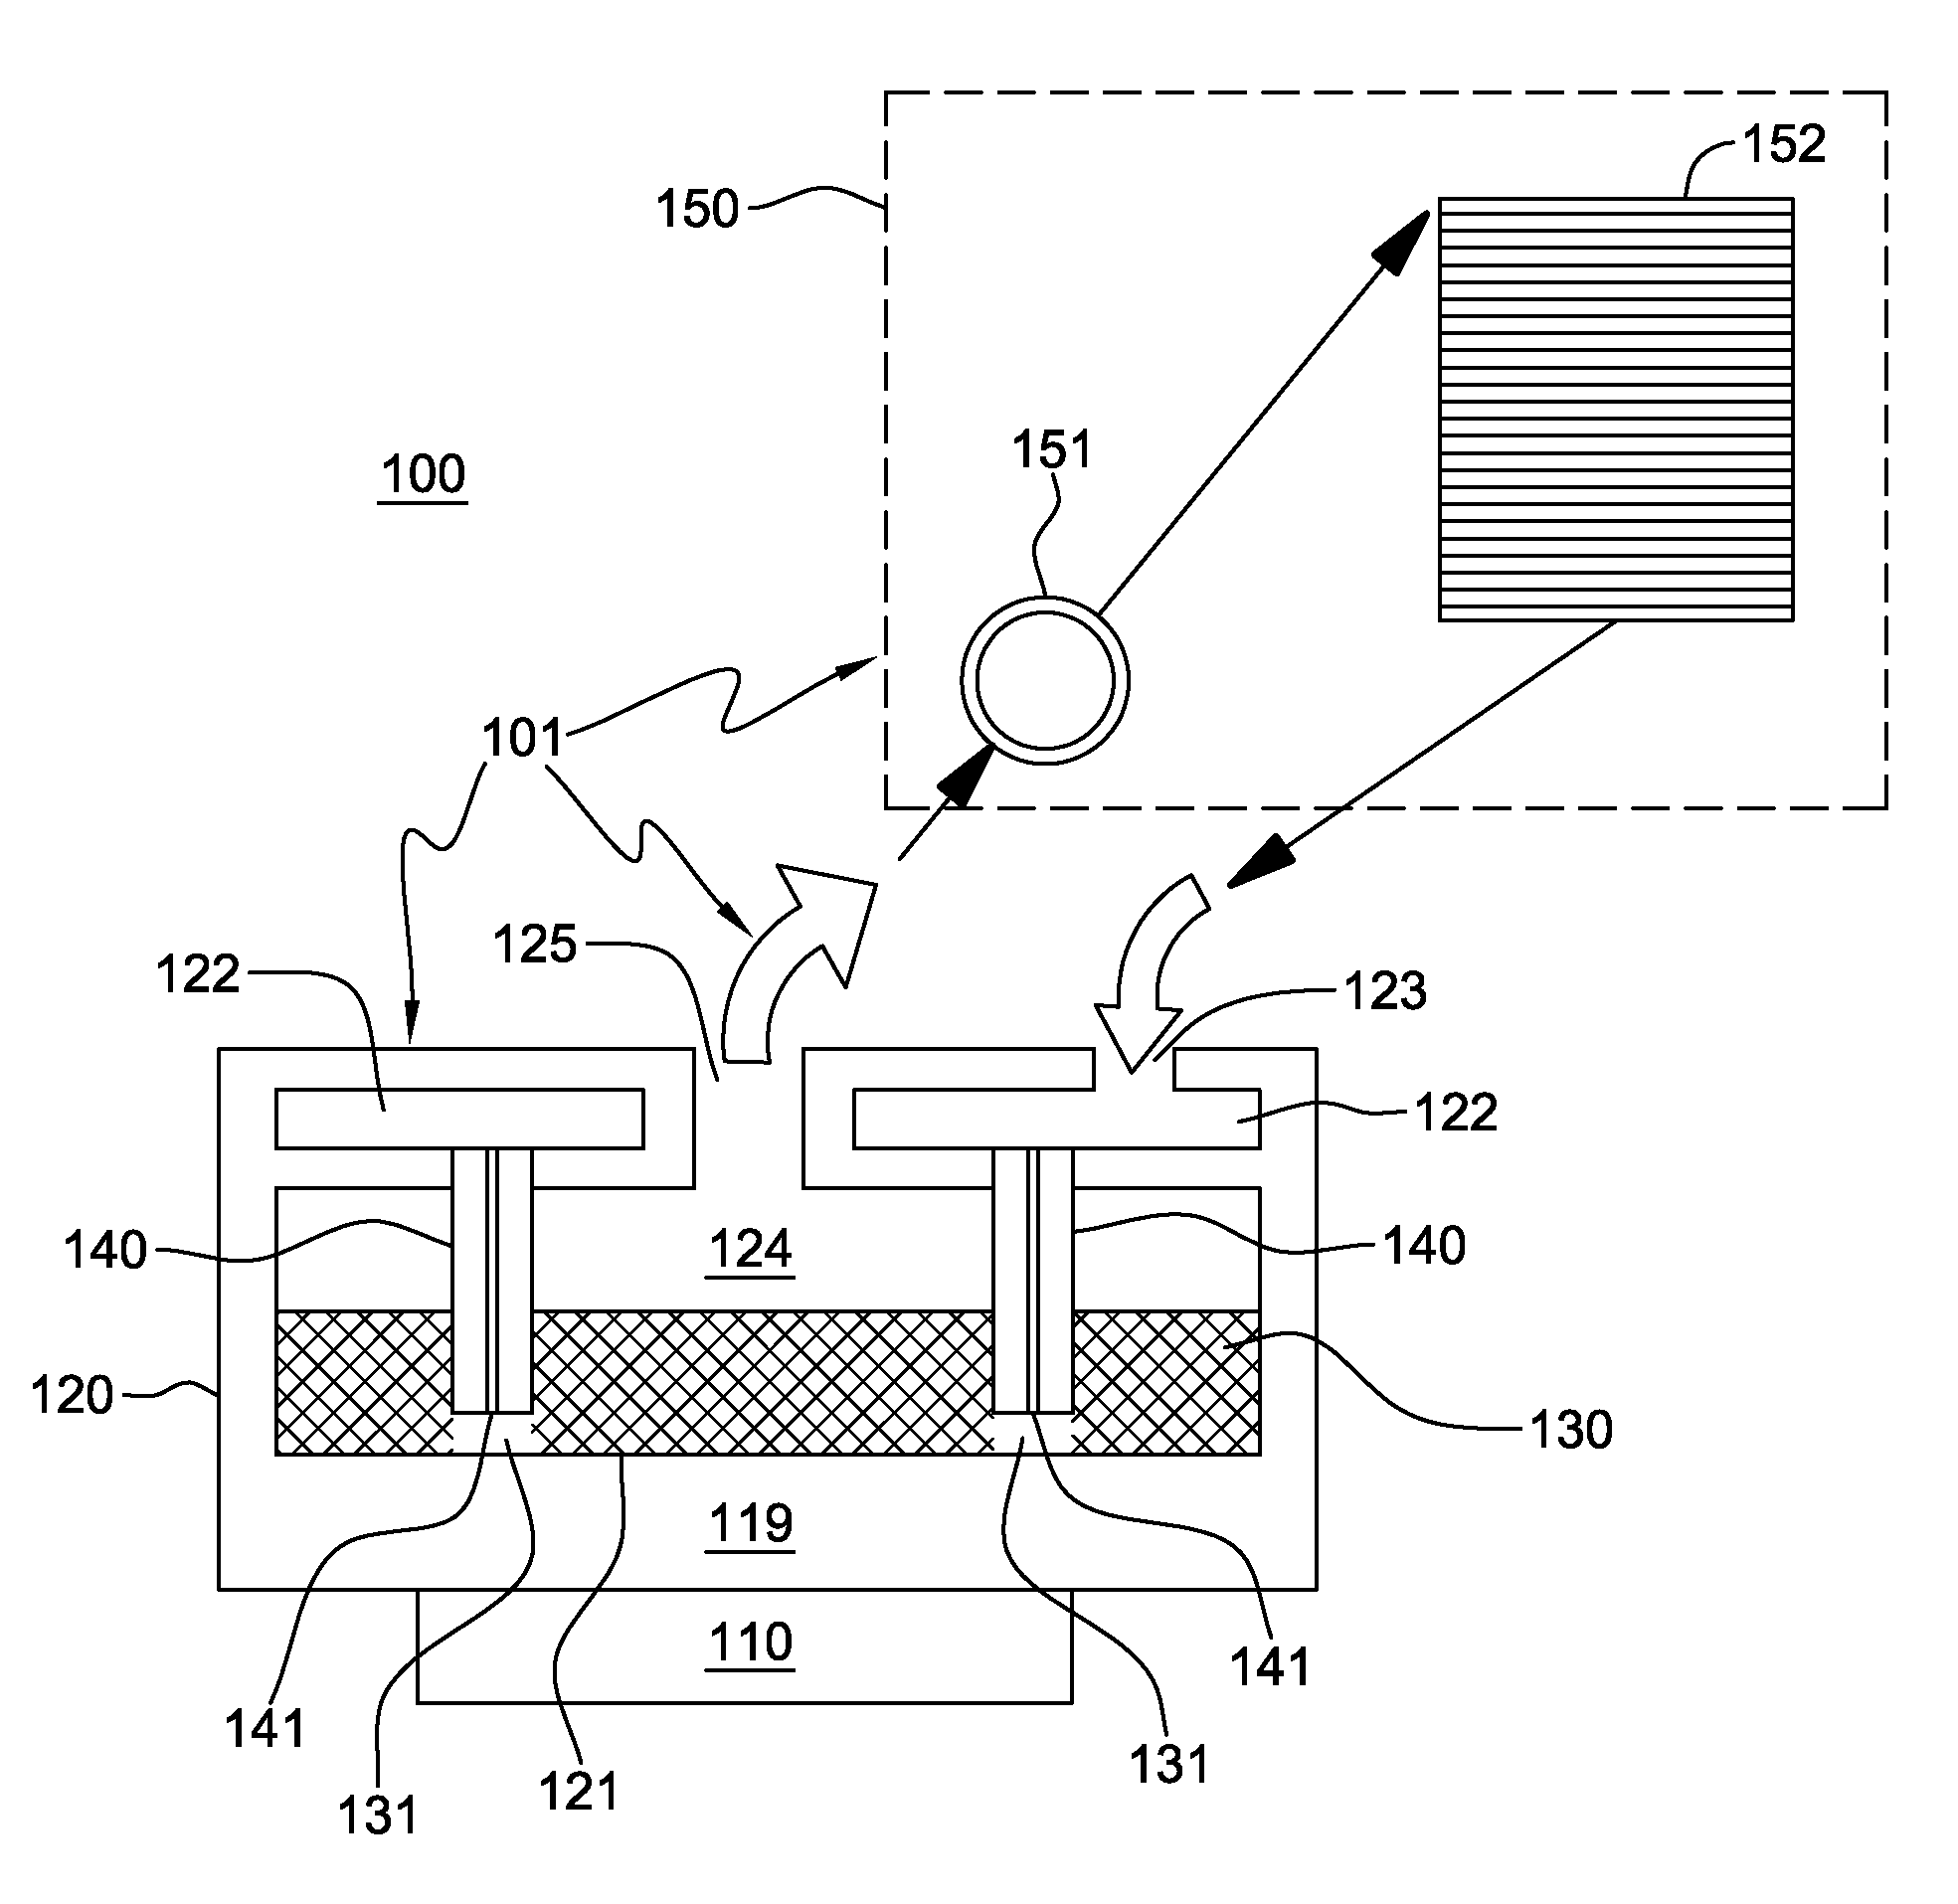 Cooling apparatus with thermally conductive porous material and jet impingement nozzle(s) extending therein